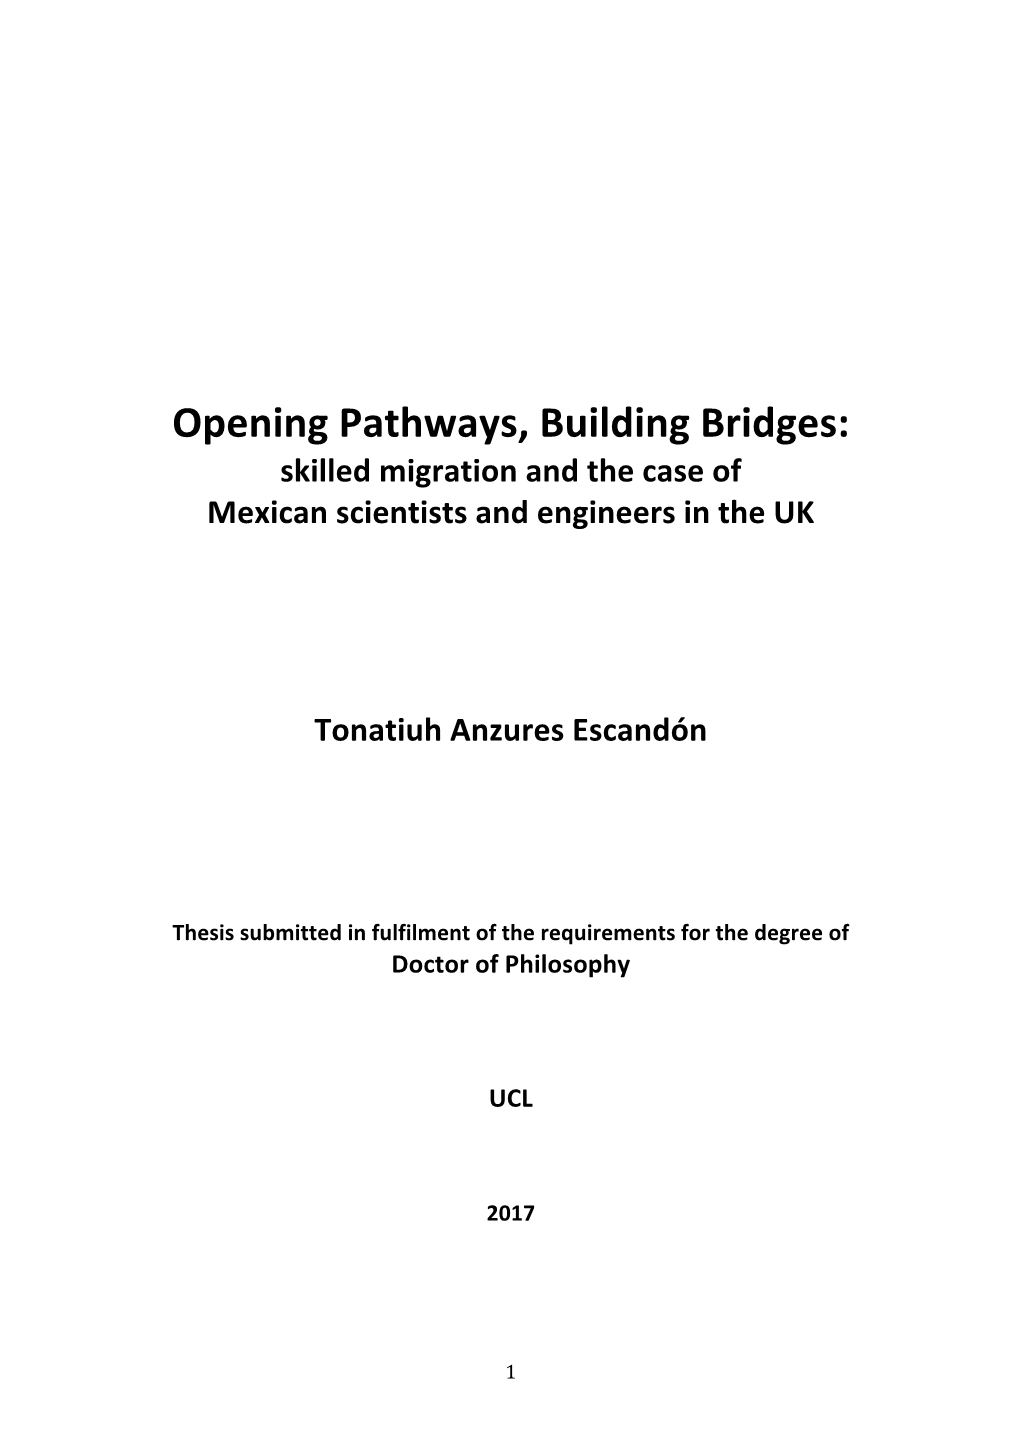 Opening Pathways, Building Bridges: Skilled Migration and the Case of Mexican Scientists and Engineers in the UK